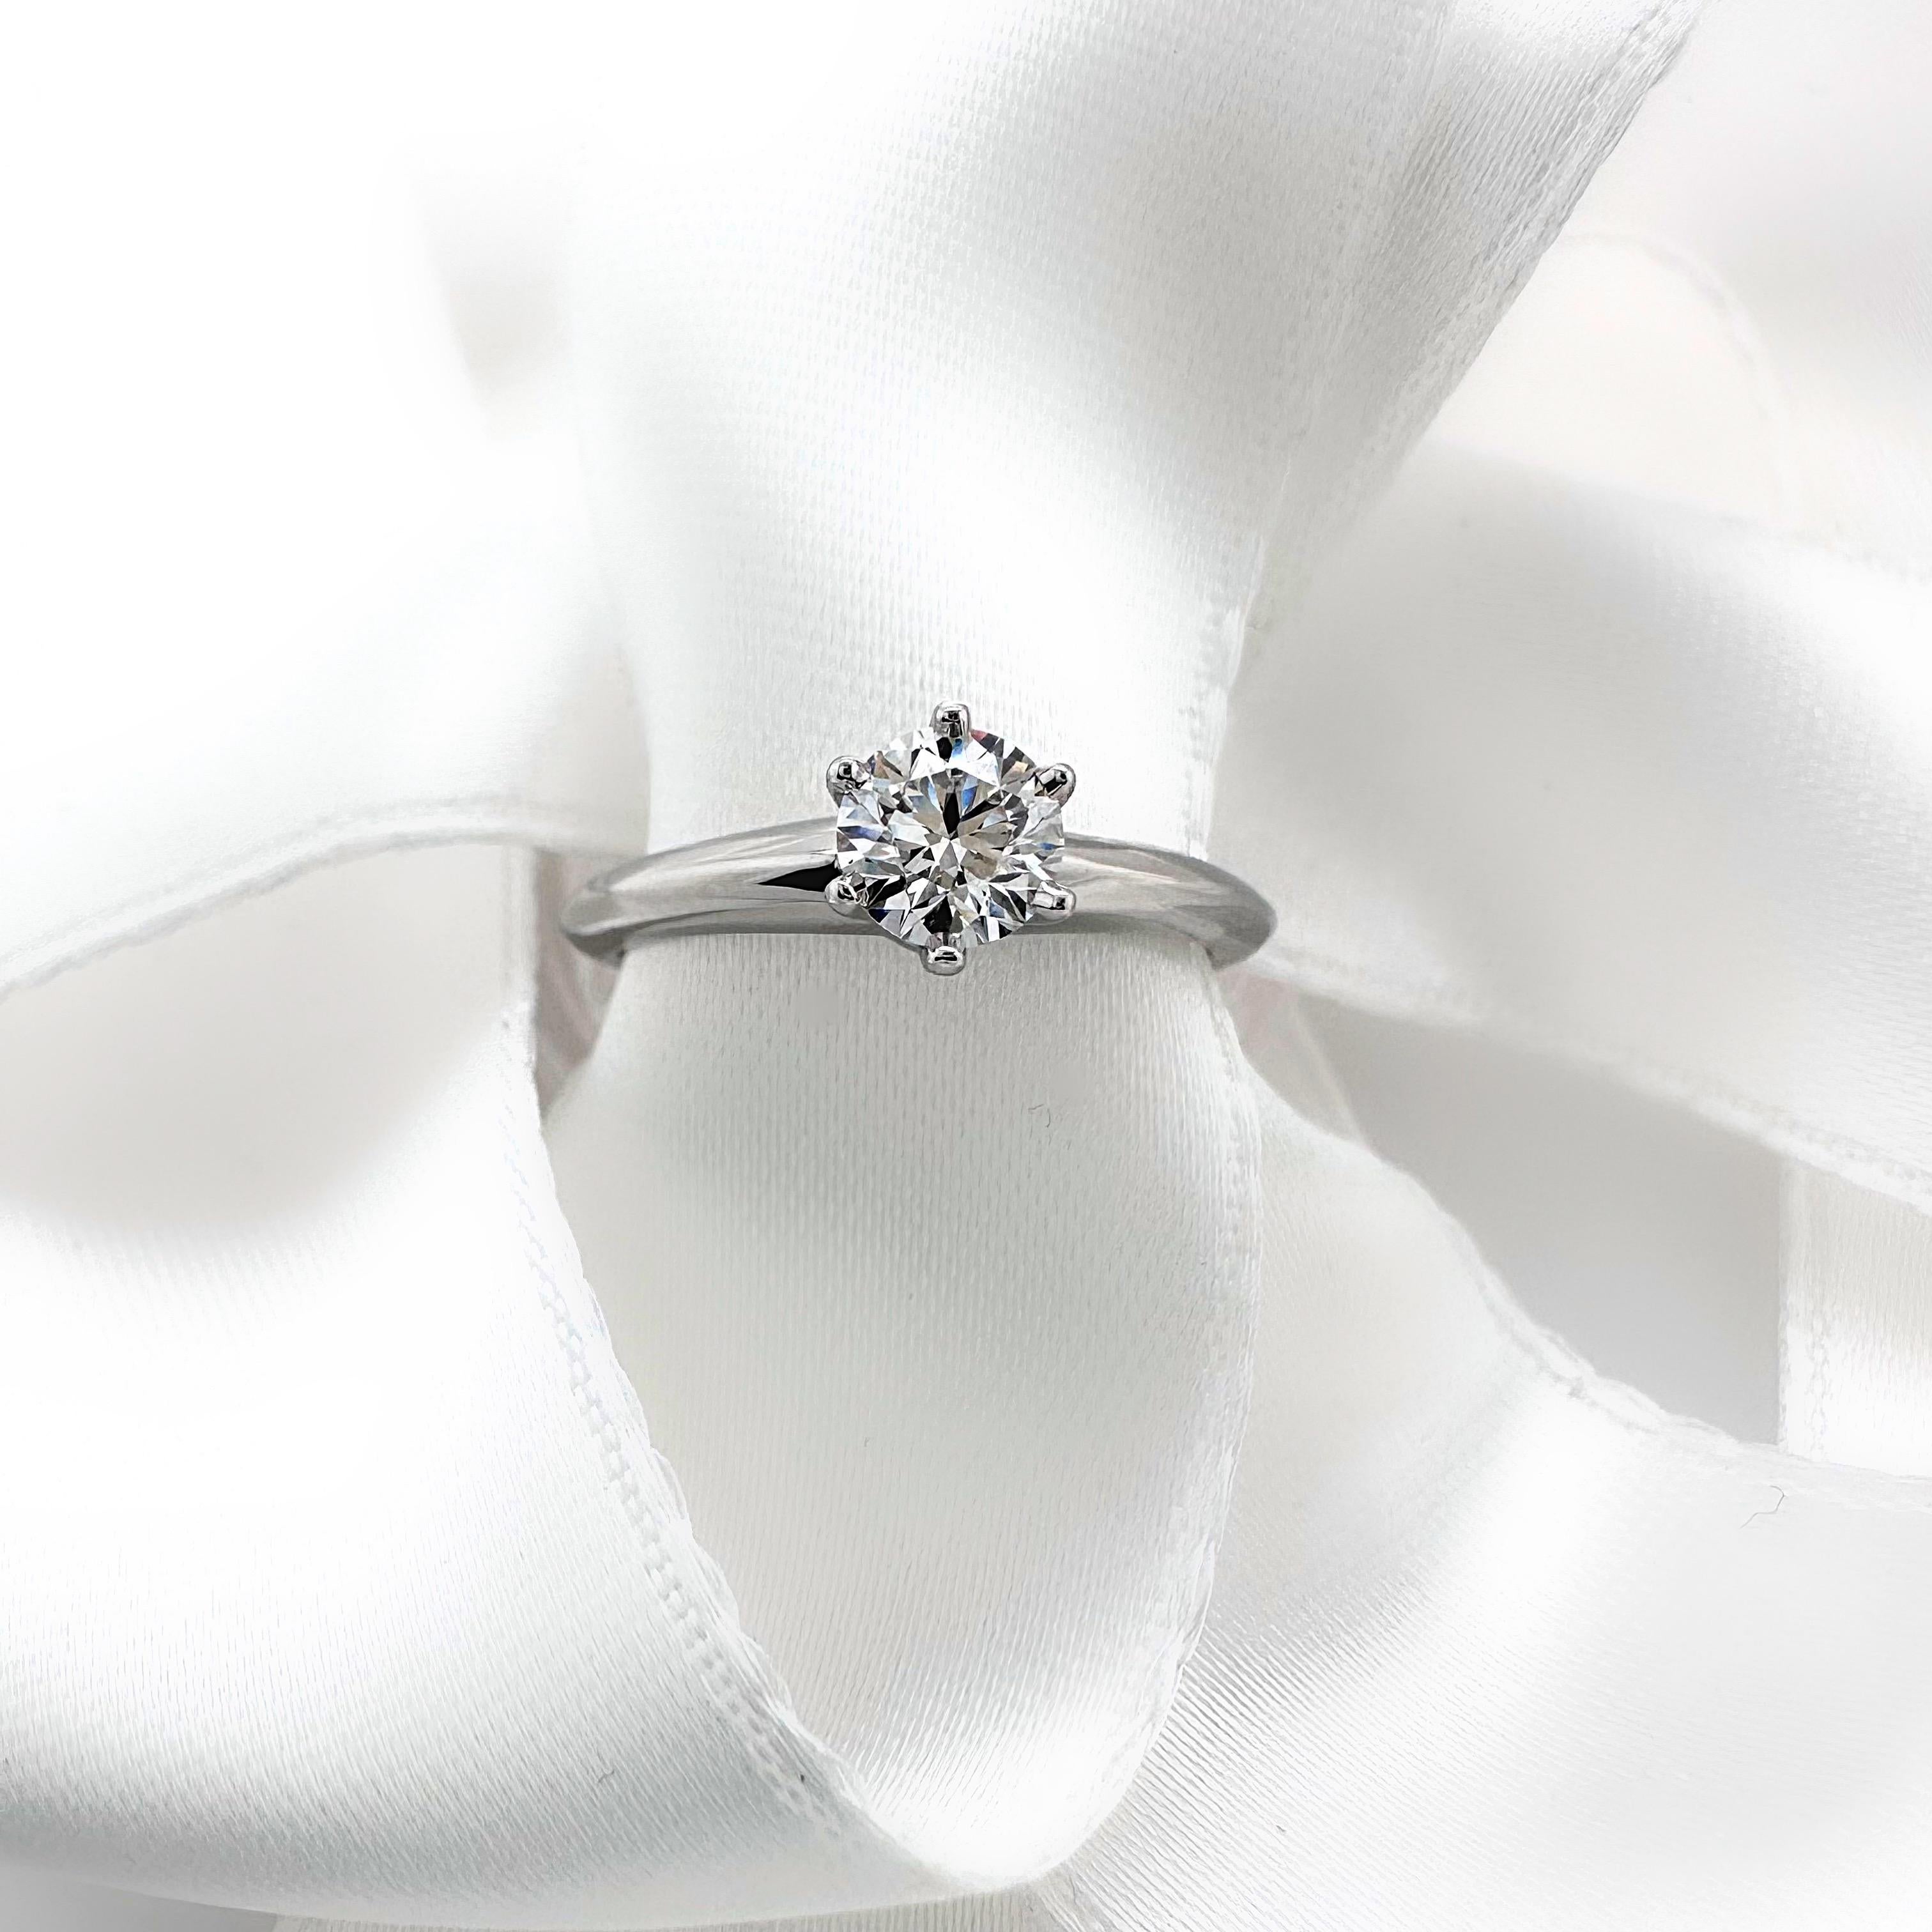 Tiffany & Co. Round Diamond 0.37 Cts F VVS1 Solitaire Engagement Ring Platinum For Sale 2